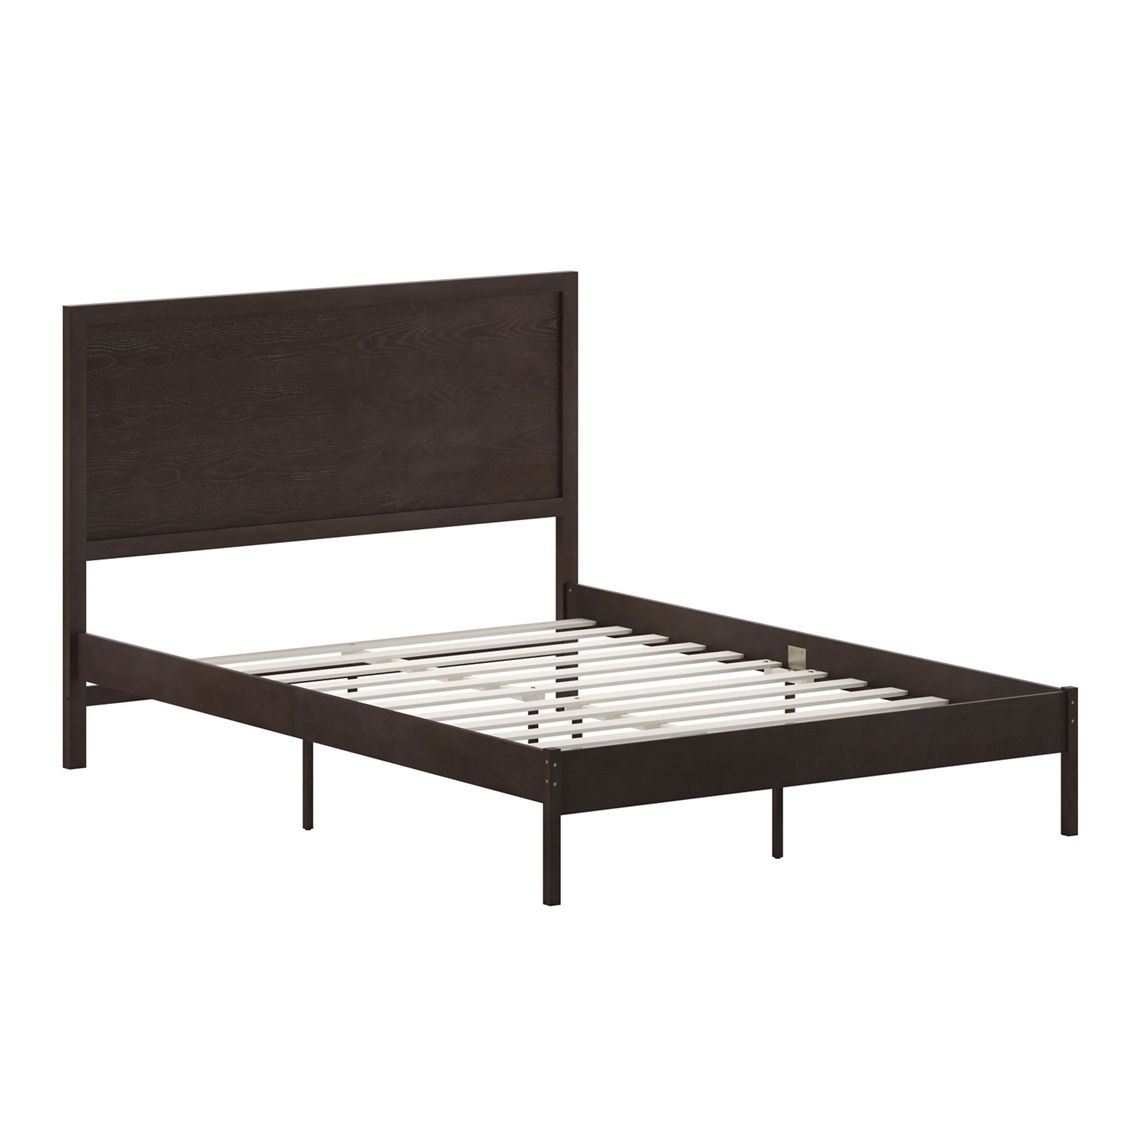 Flash Furniture Wooden Platform Bed with Headboard - Image 4 of 5